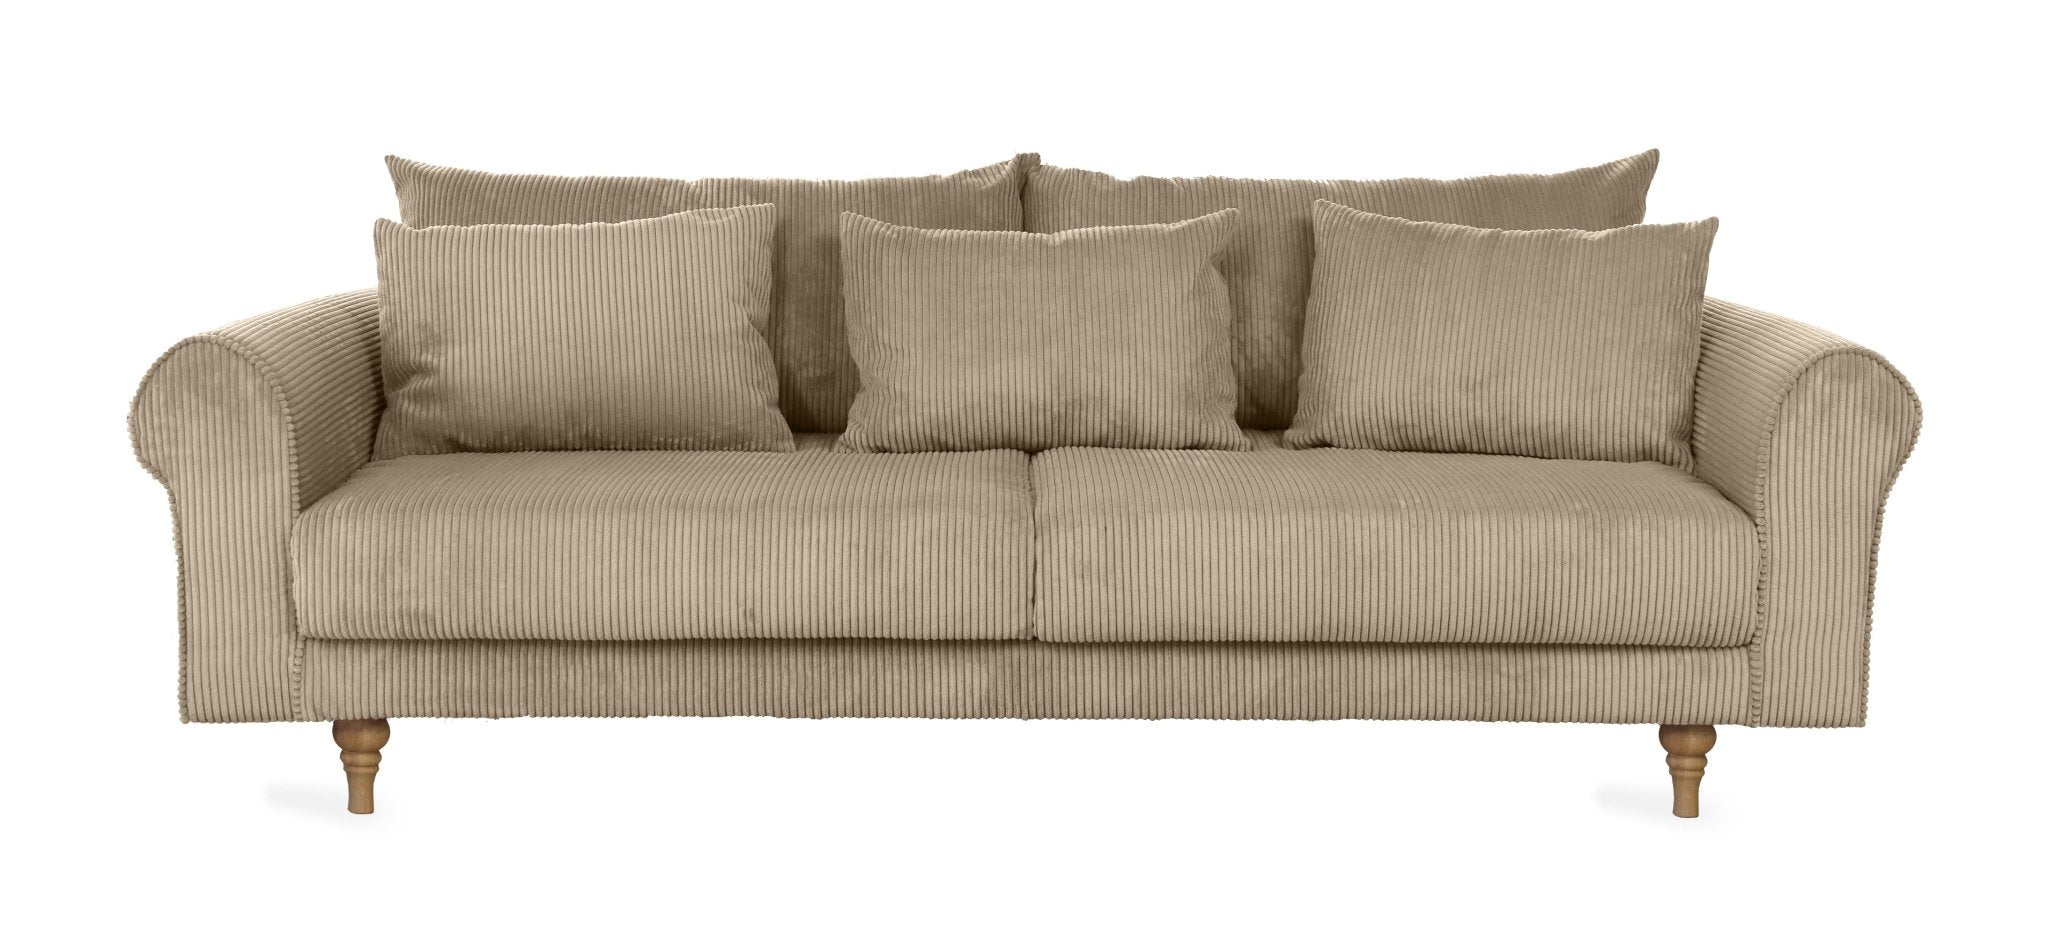 SELMA 4-seater sofa/sofa bed Corduroy, Nougat, removable & washable covers - Scandinavian Stories by Marton